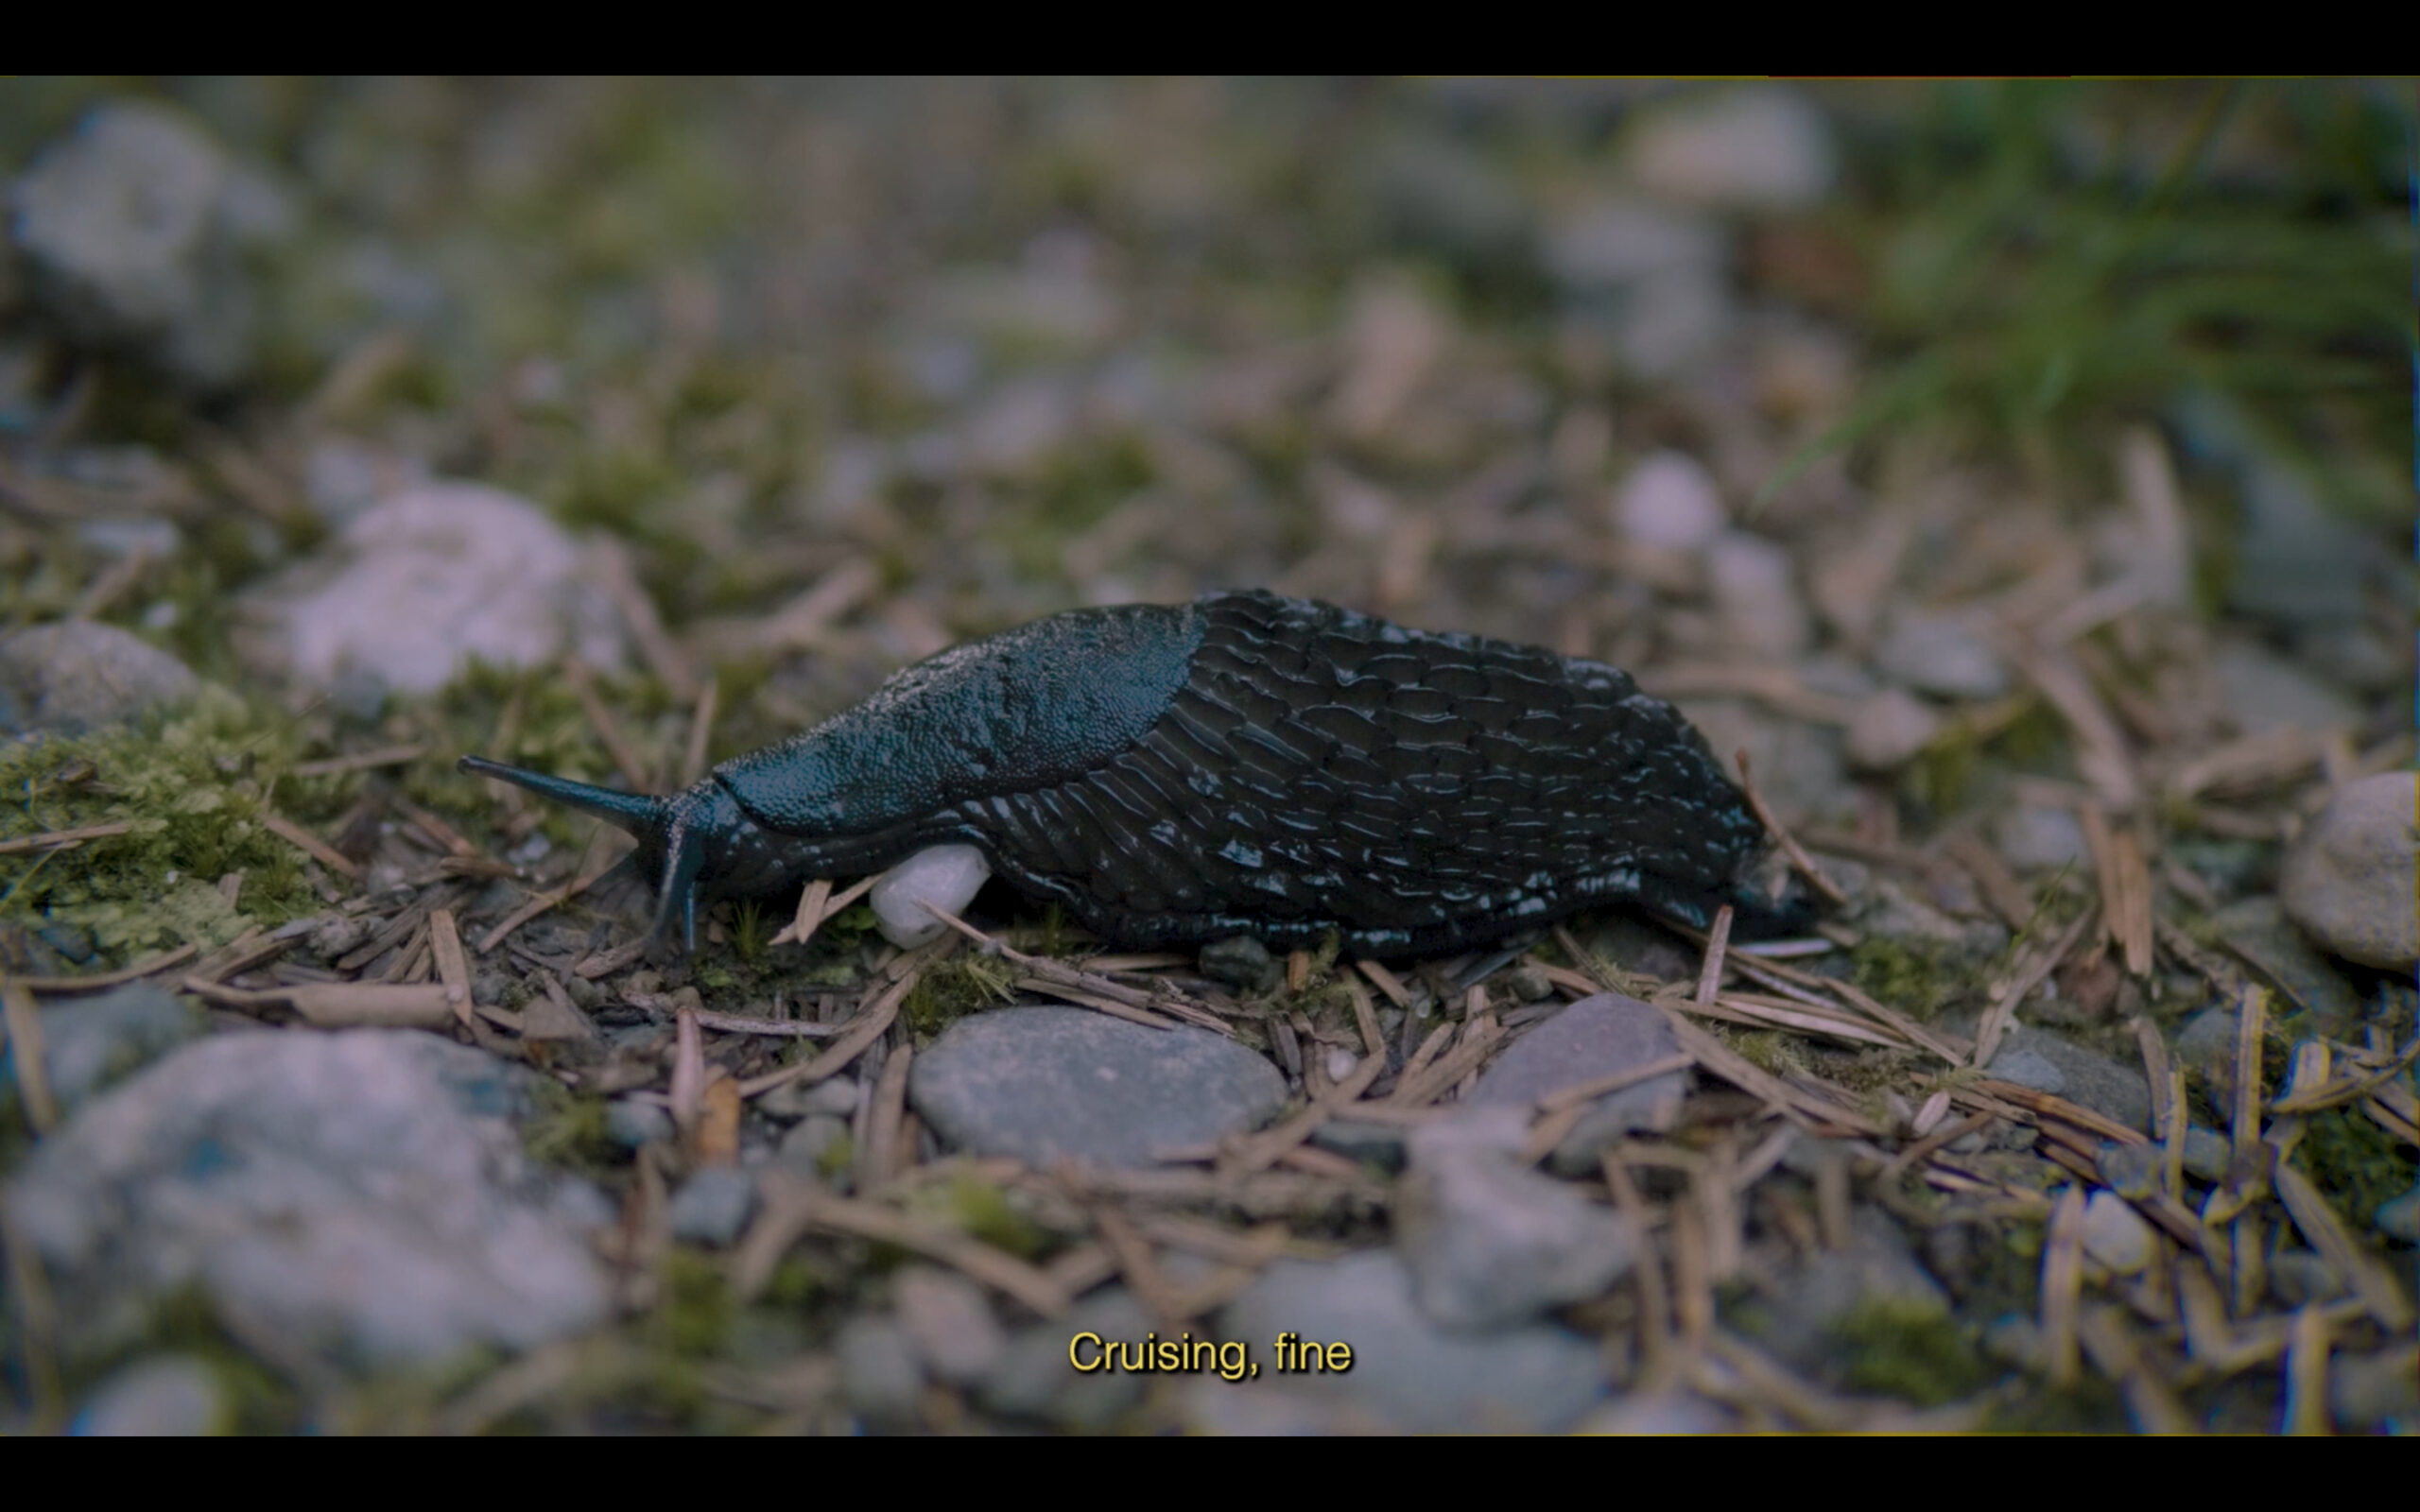 Image: Adrien Howard & K Patrick, Silence, film still, 14 minutes, 2021. Courtesy the artists. Description: a glossy black slug in the centre of the image makes its way across pebbles and mossy mulch, subtitles in yellow read ‘Cruising, fine’. 